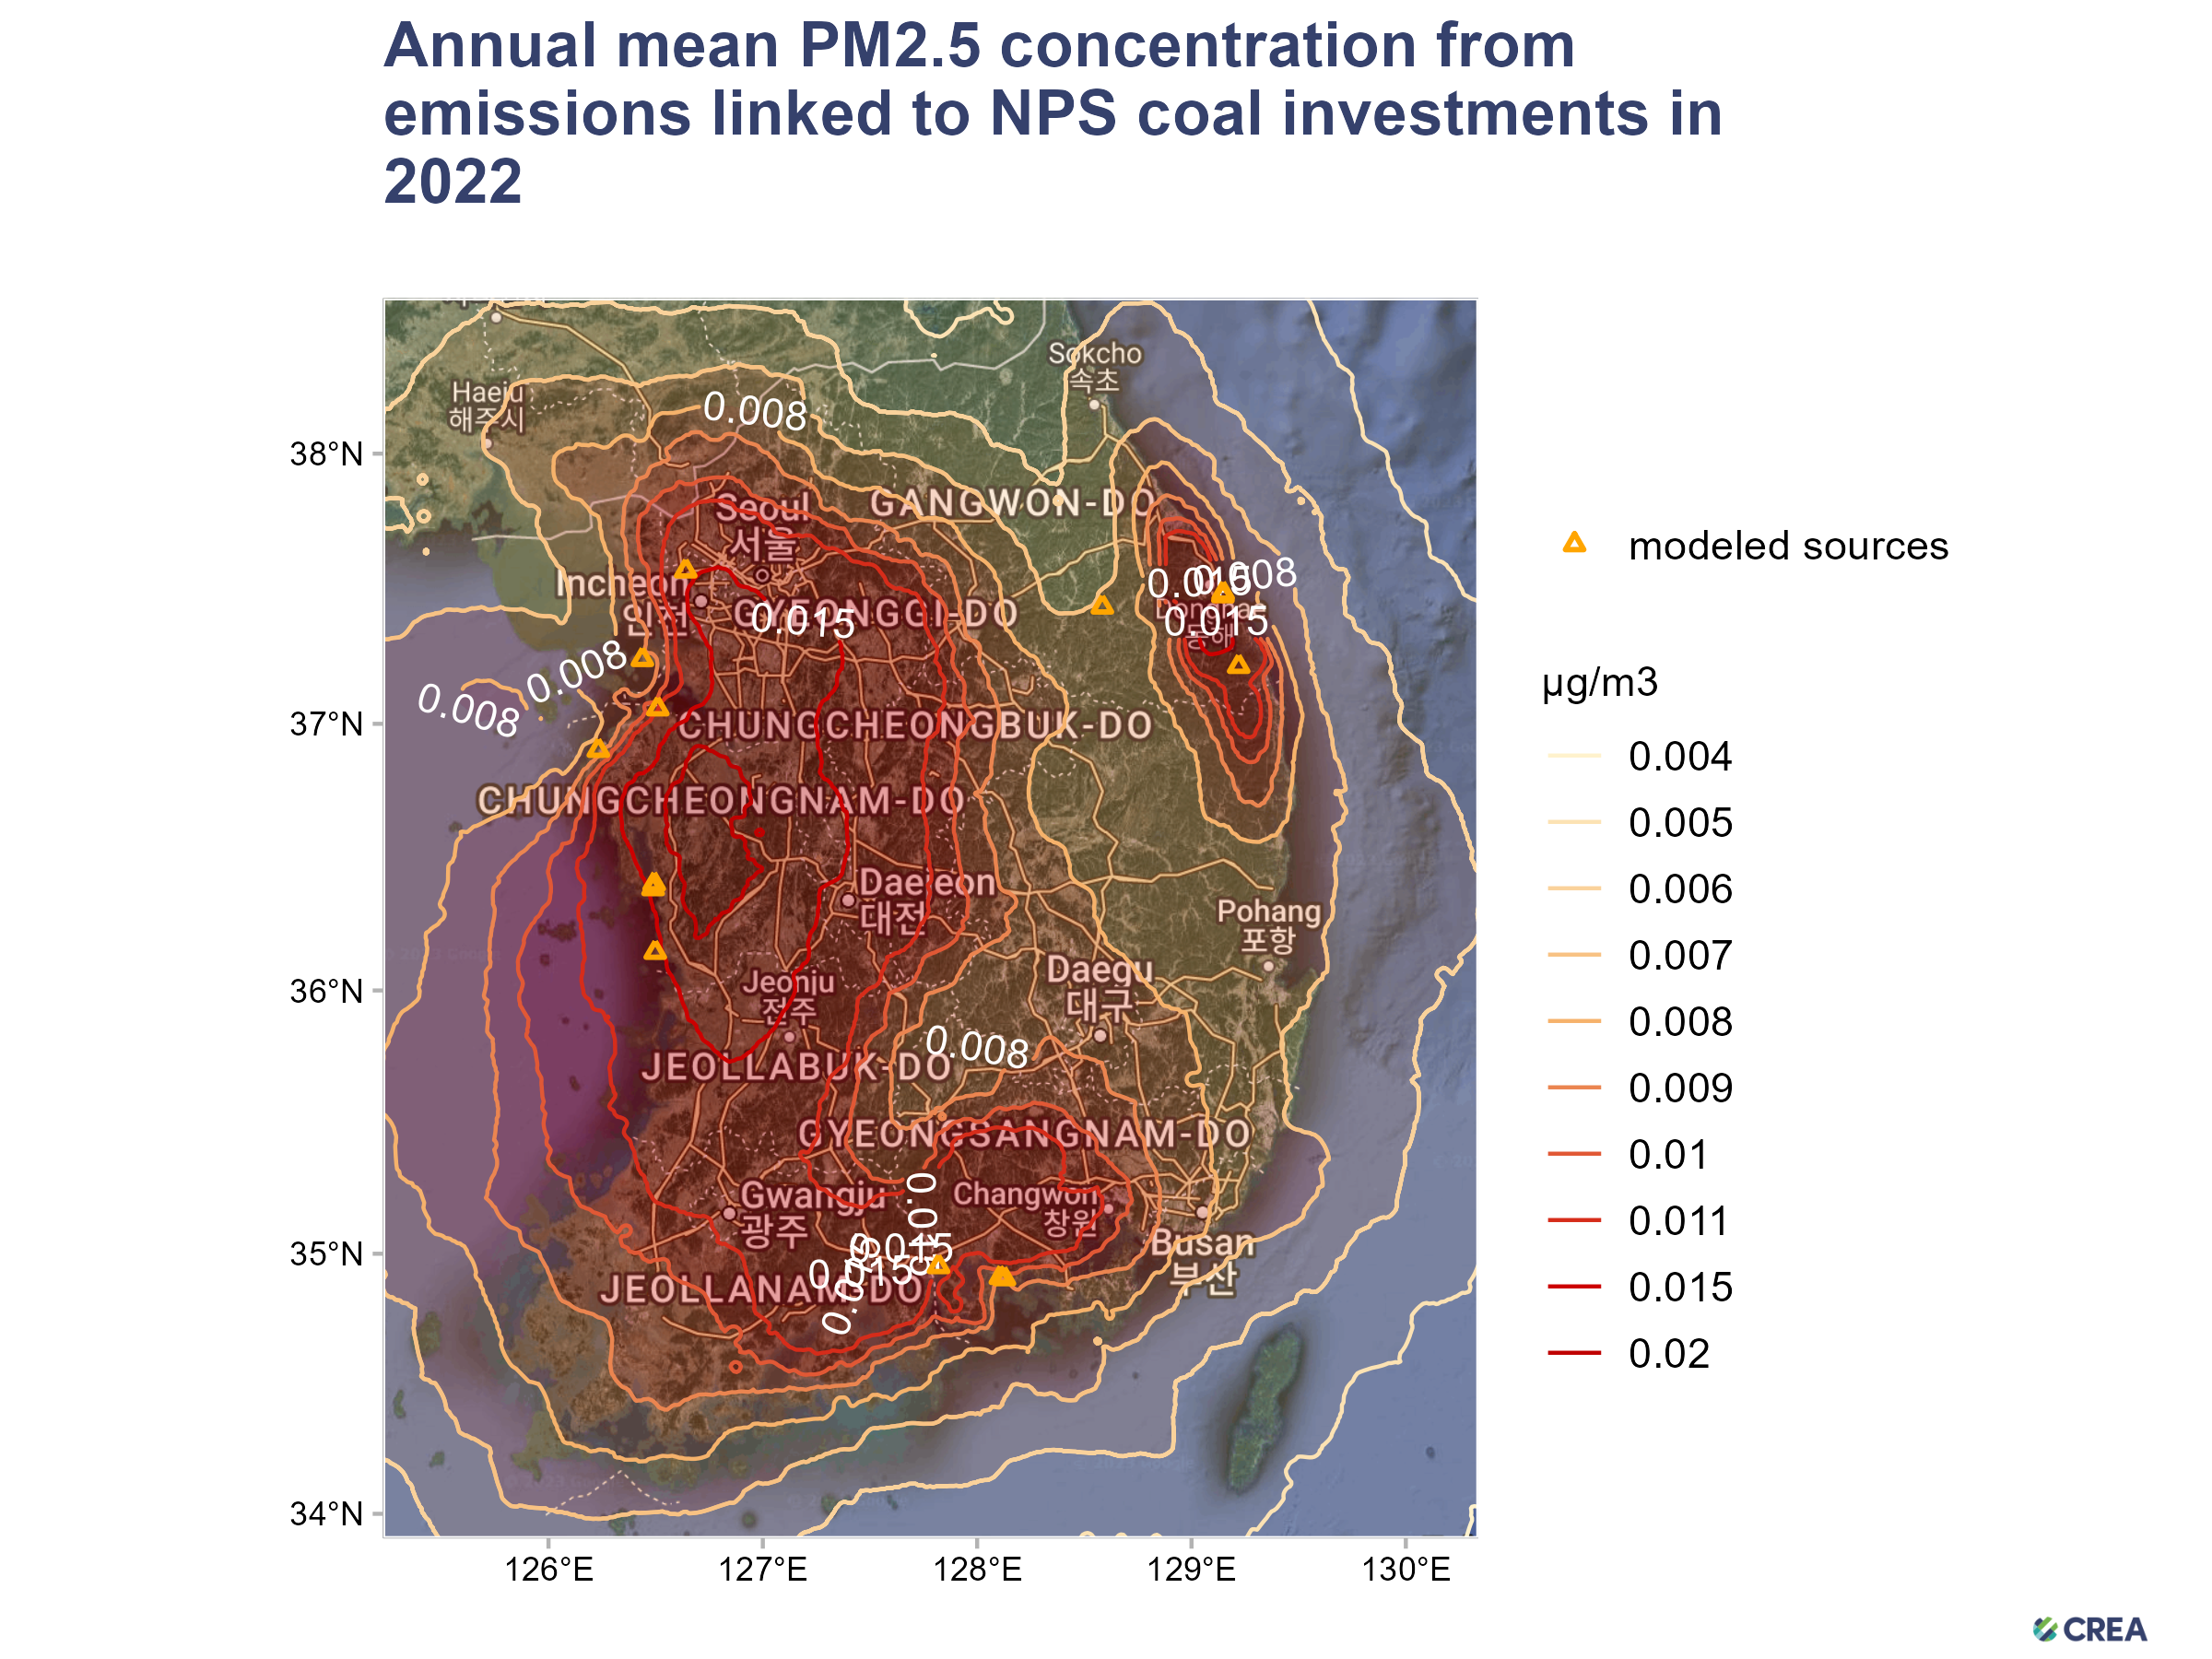 Annual mean PM2.5 concentration from emissions linked to NPS coal investments in 2022